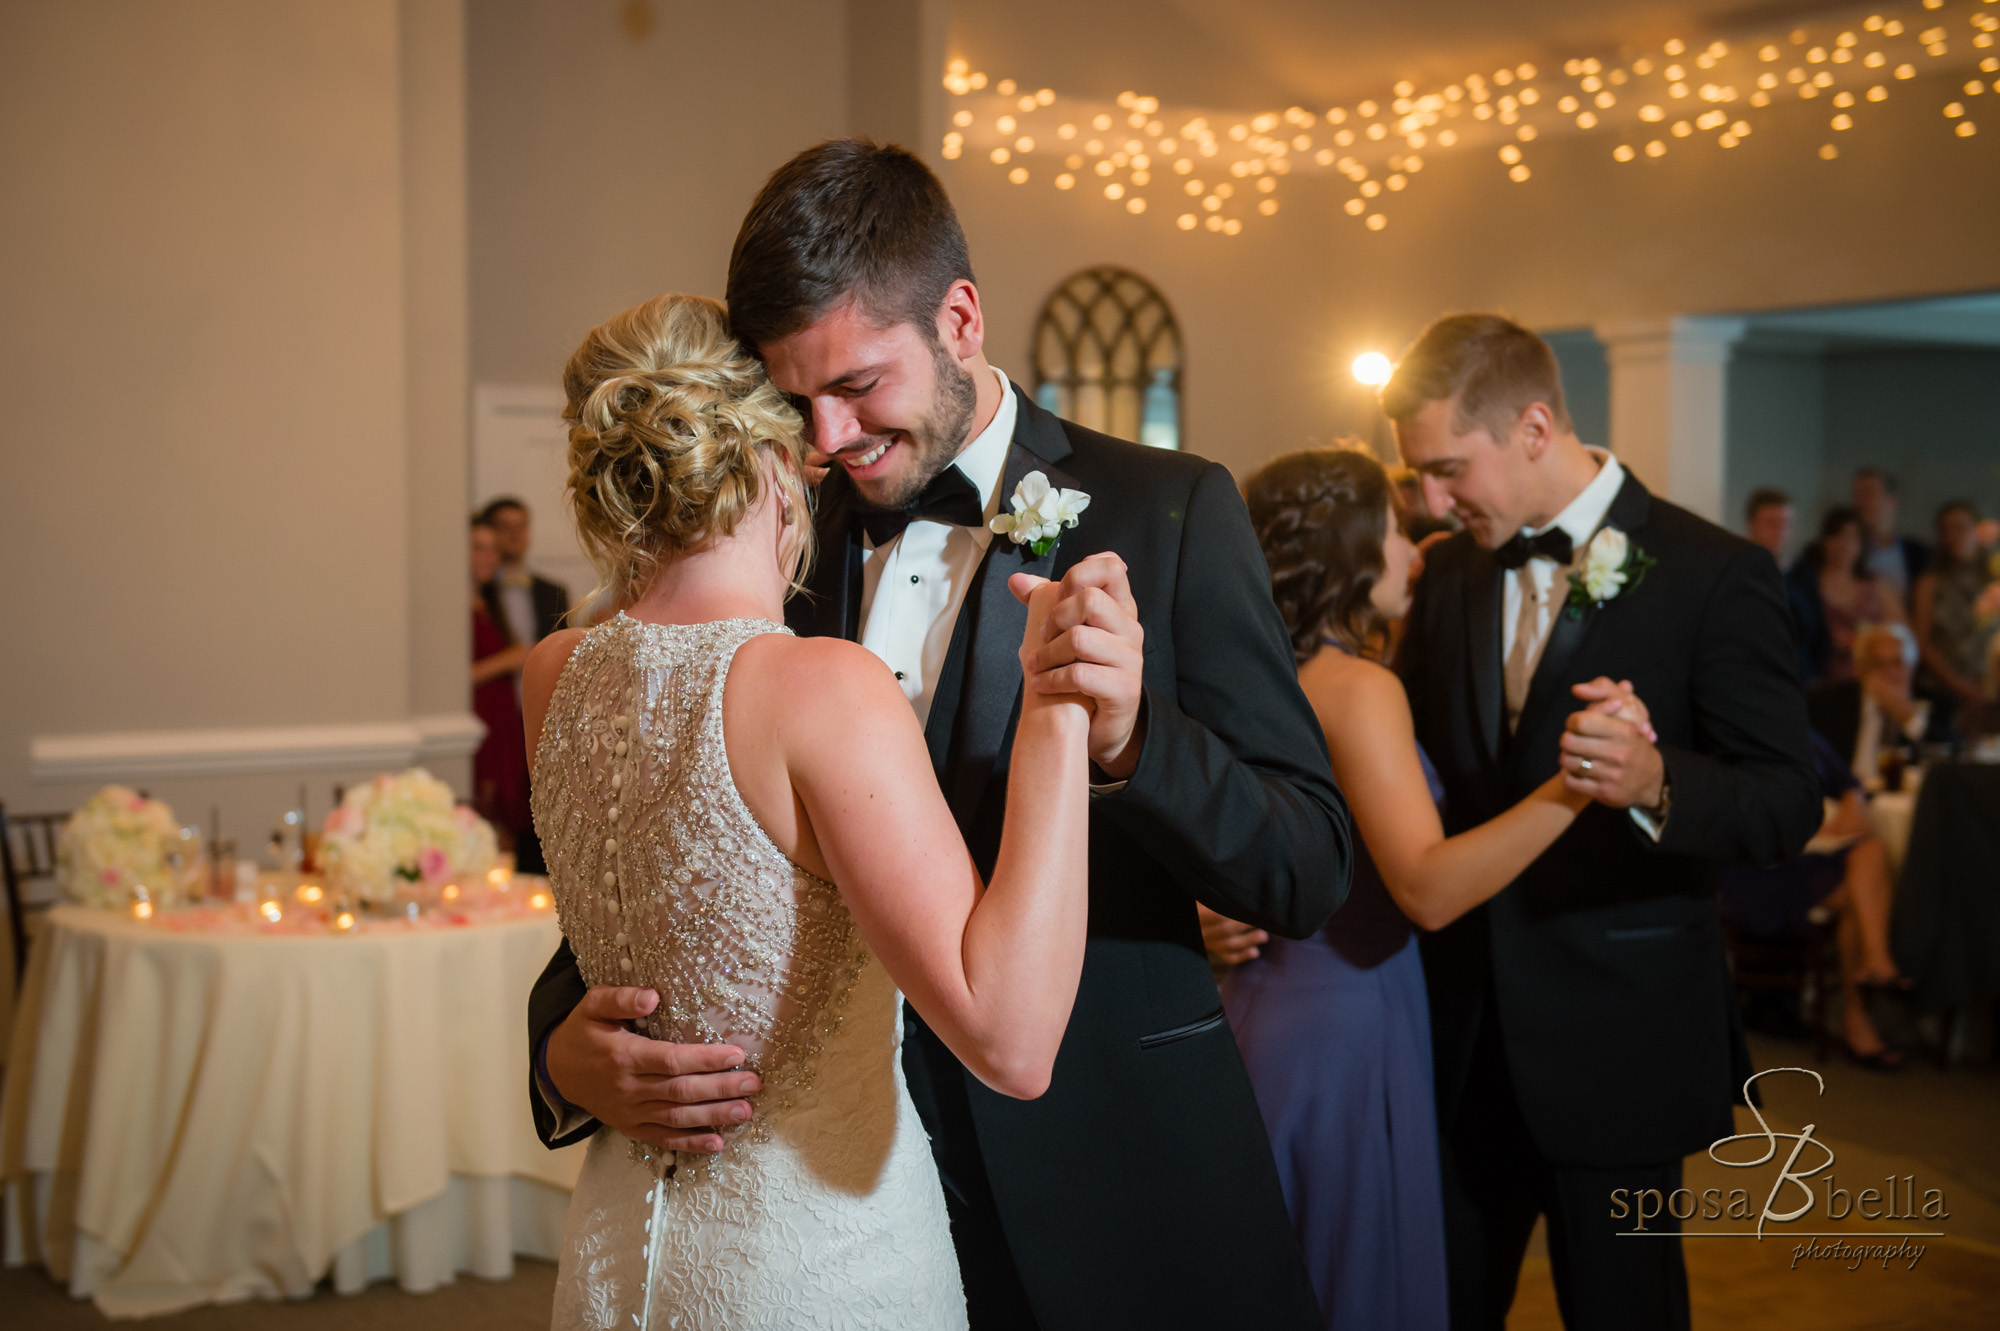  Since they are so close to their siblings, Courtney &amp; Chris decided to hold a joint special dance with them. Courtney took turns dancing with each of her brothers as Chris danced with his sister. At the end of the song, all the siblings joined o